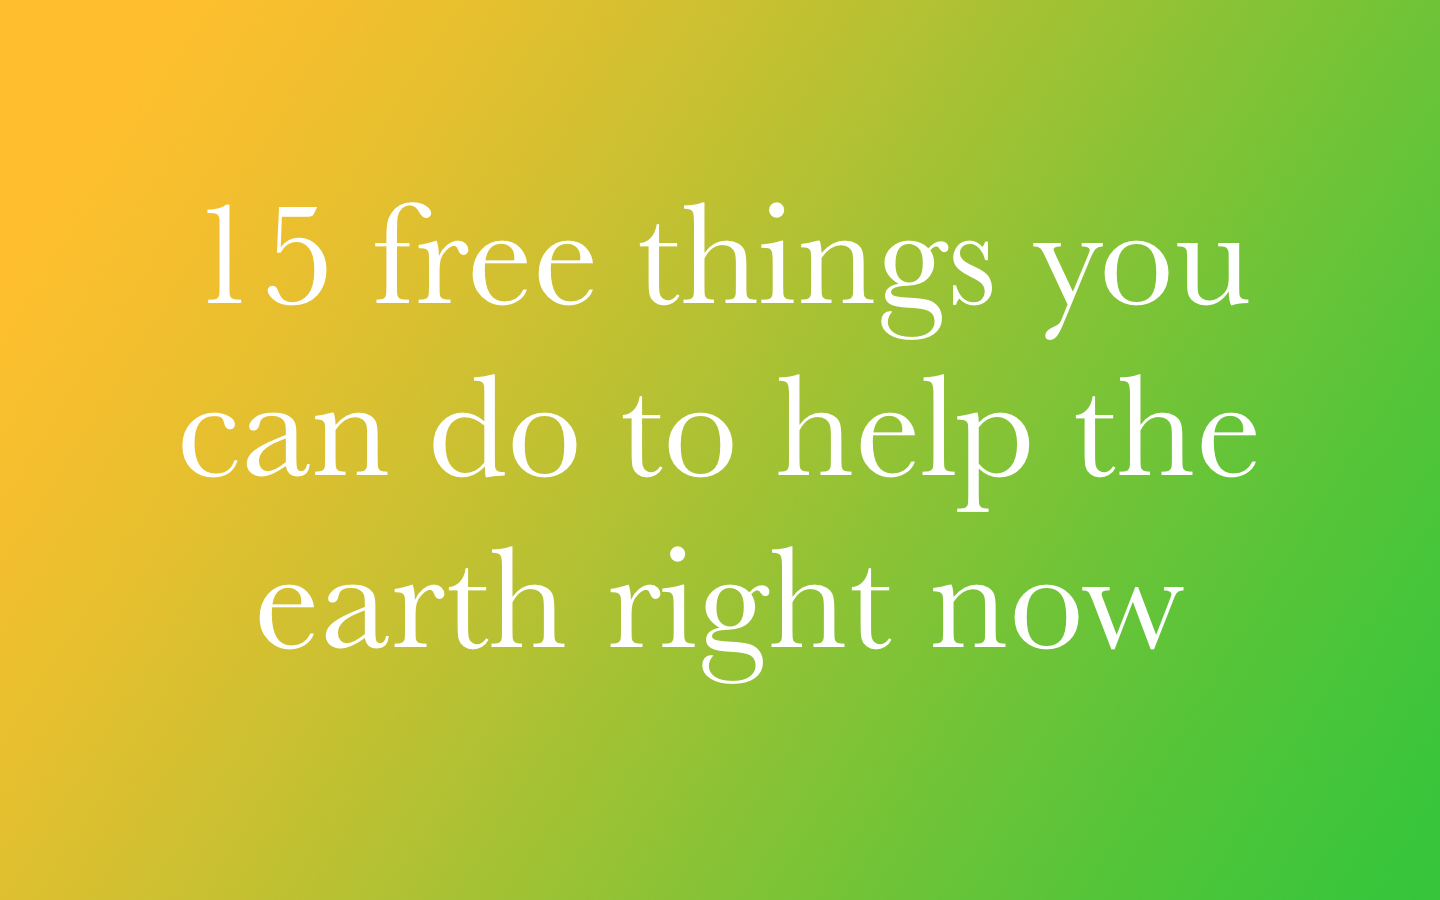 15 Free Things You Can Do To Help the Earth Right Now